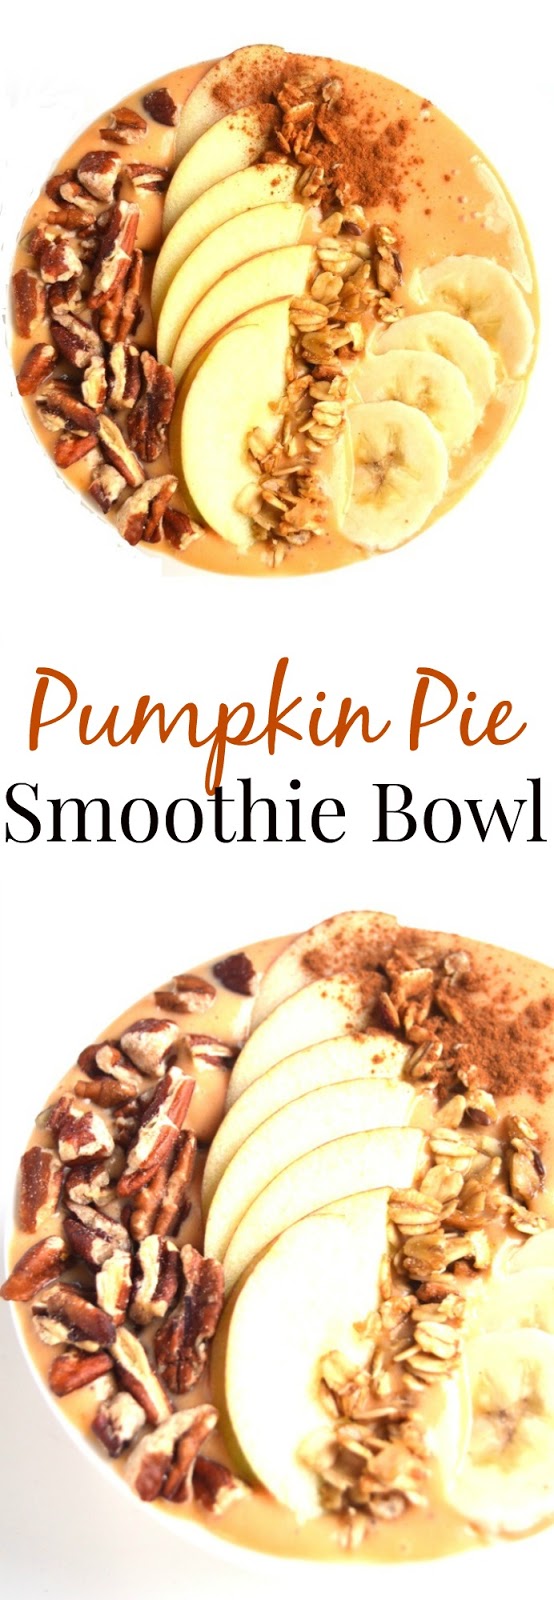 Pumpkin Pie Smoothie Bowl is ready in under 5 minutes and tastes like your favorite pumpkin pie but is packed full of nutrients and fun toppings! www.nutritionistreviews.com